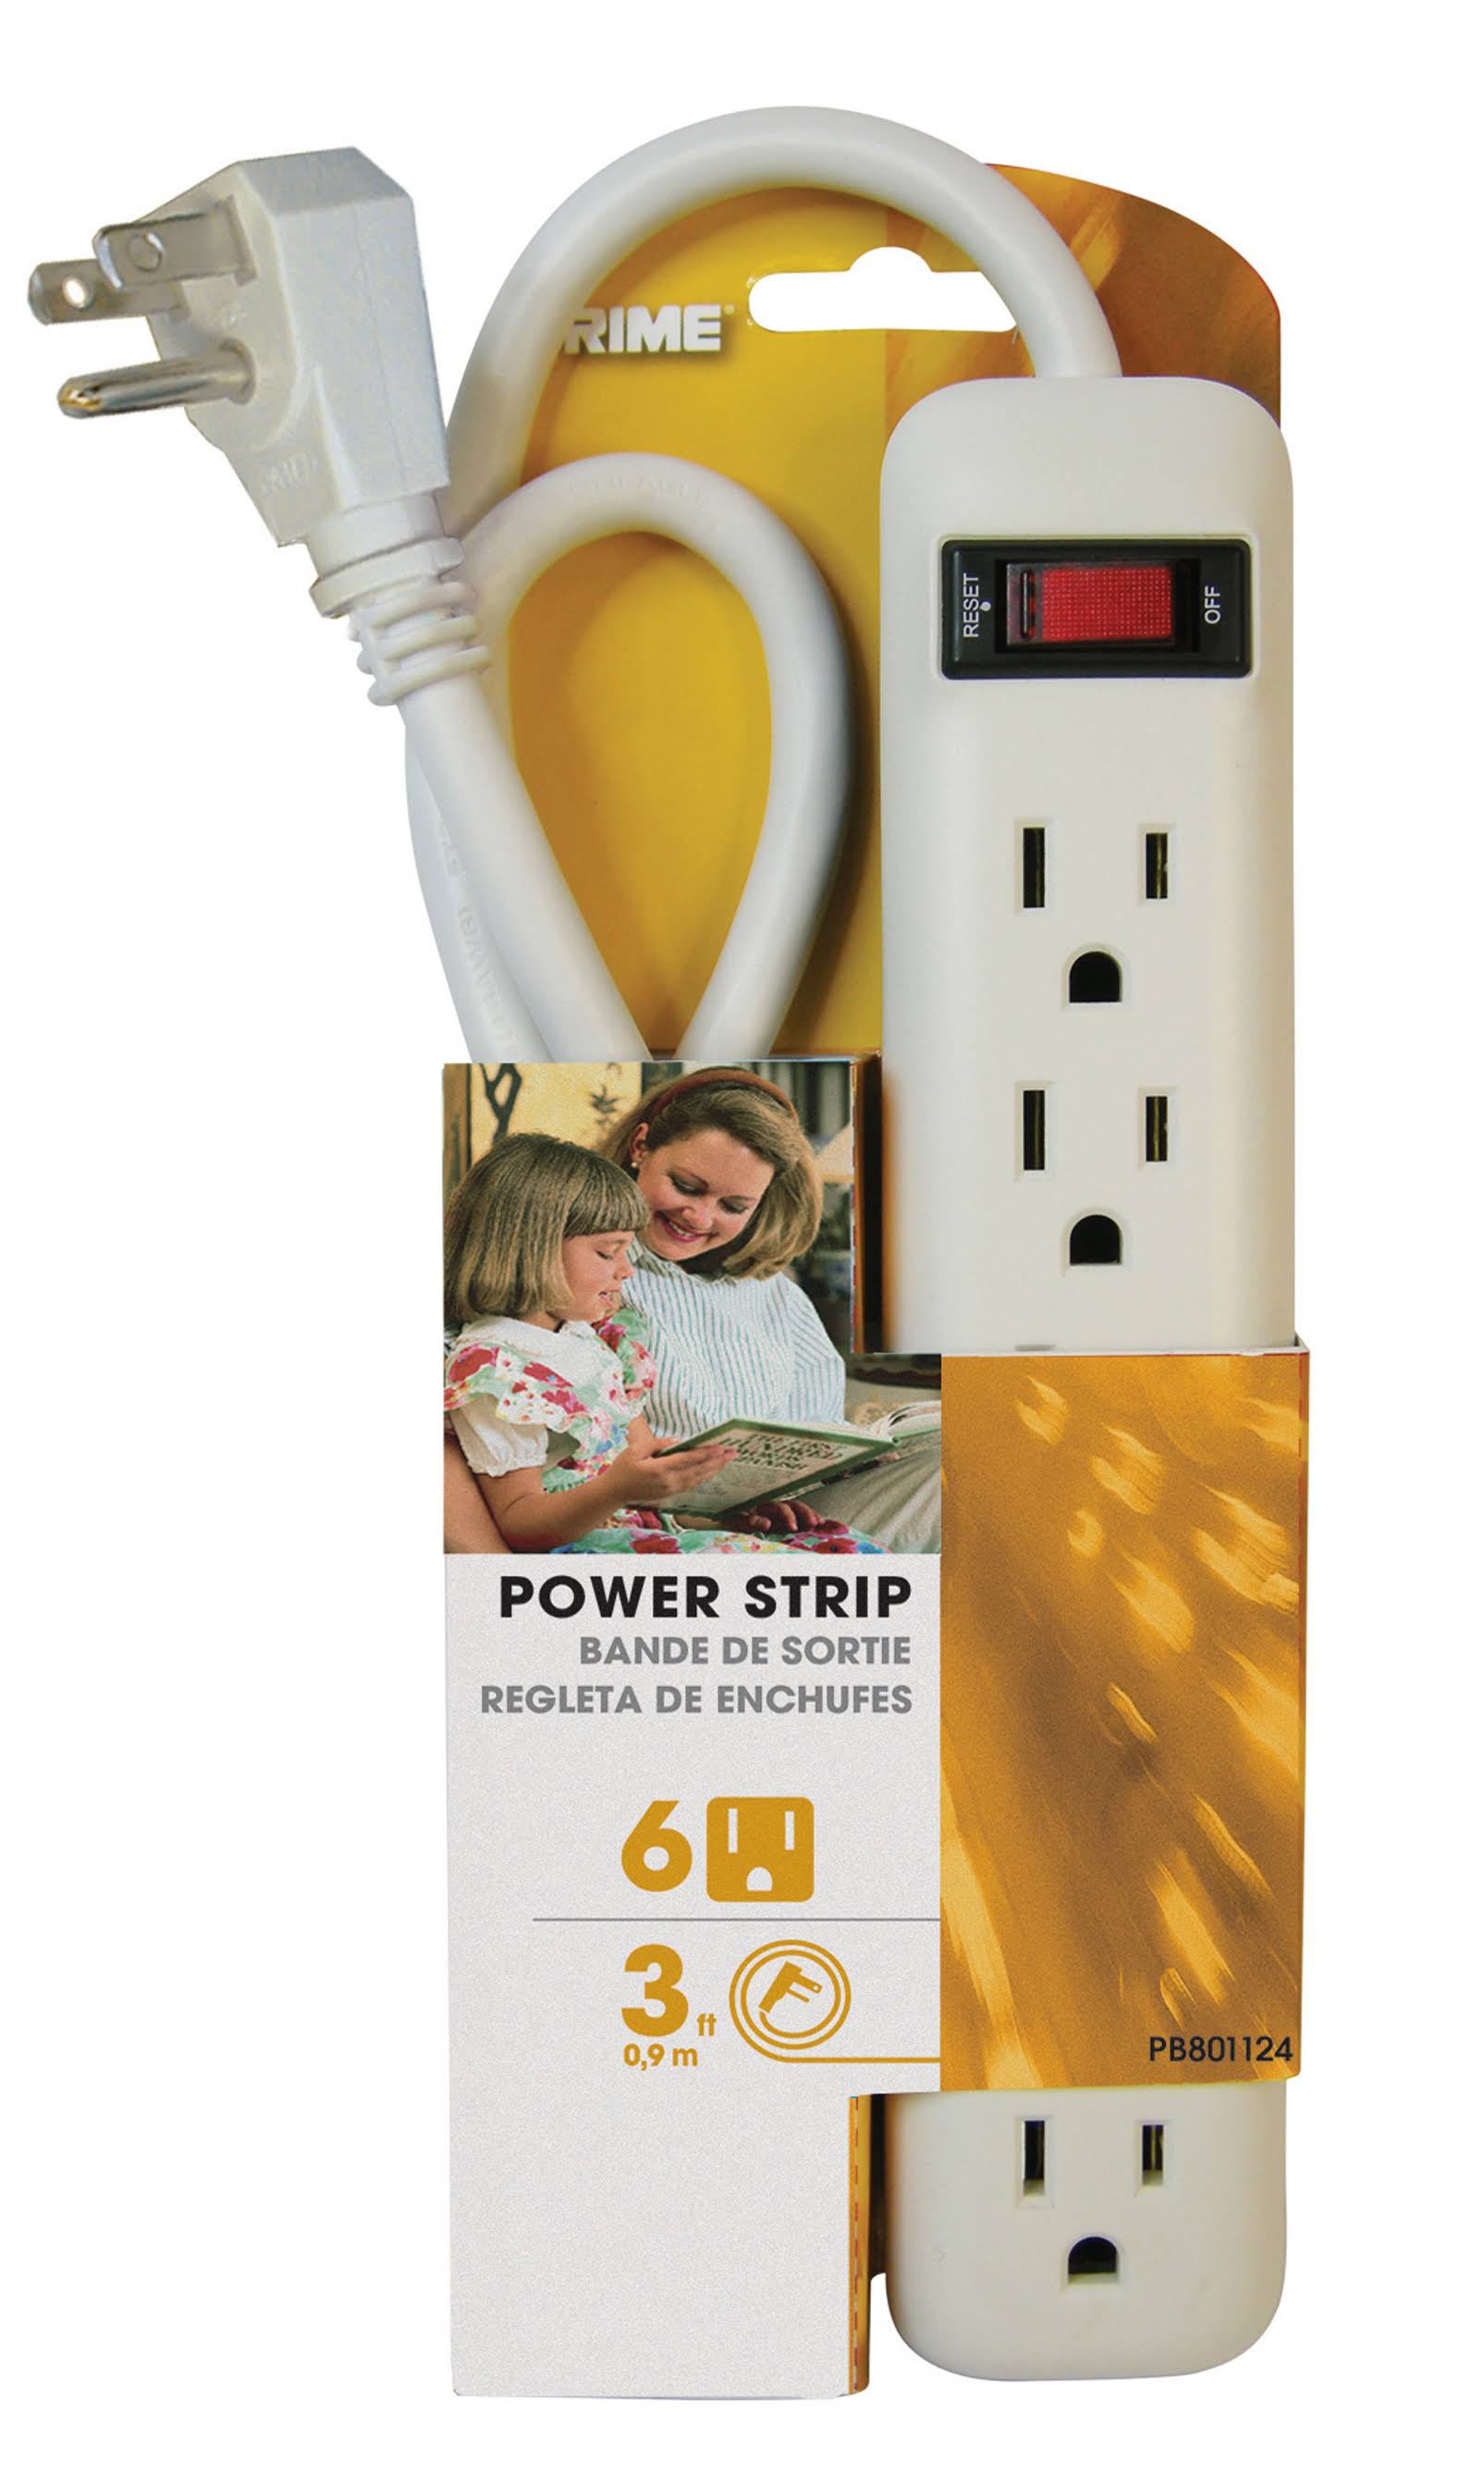 Prime Power Strip Extension Cord - with 3' Cord, White, 6 Outlet